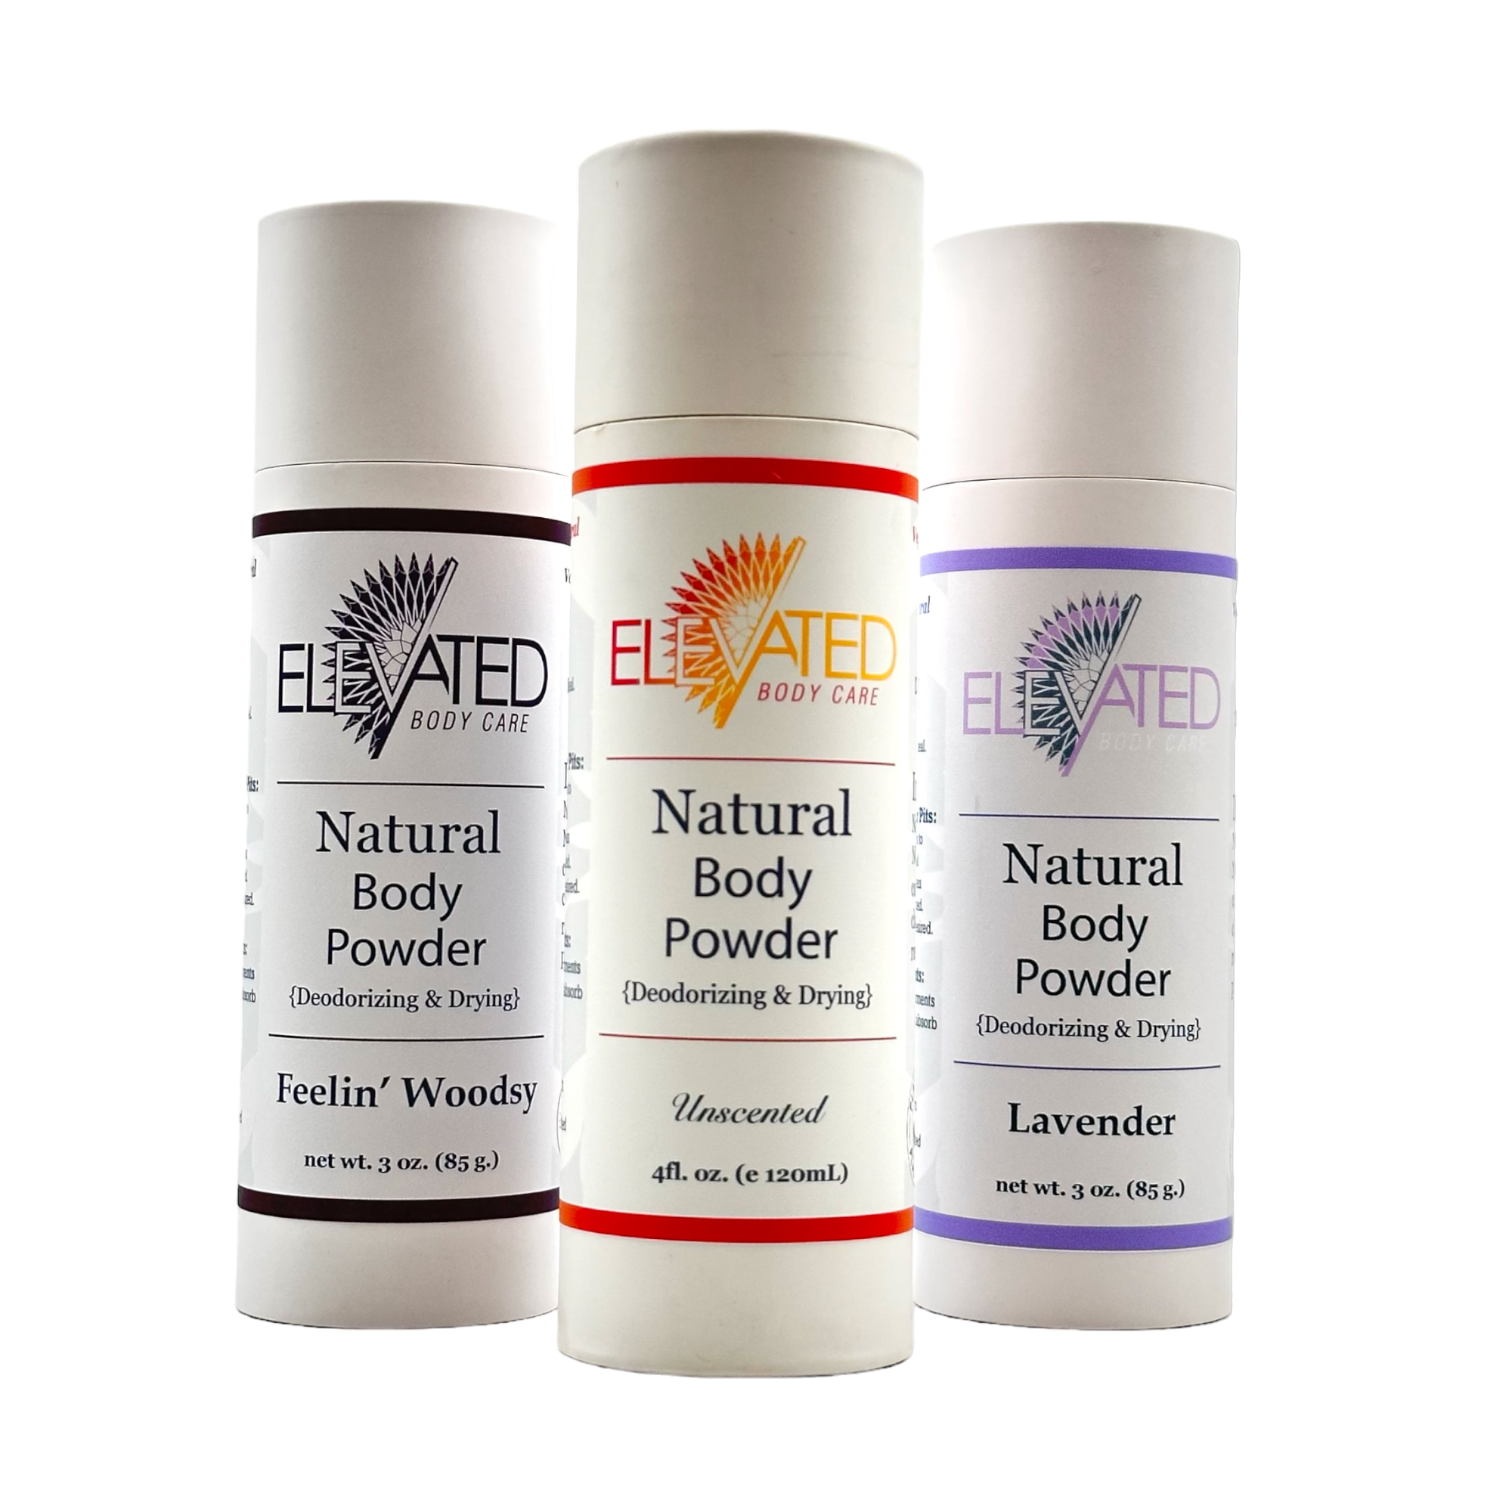 ELEVATED - Herbal Body Powder (All Natural * Talc Free) – TAYLOR'S